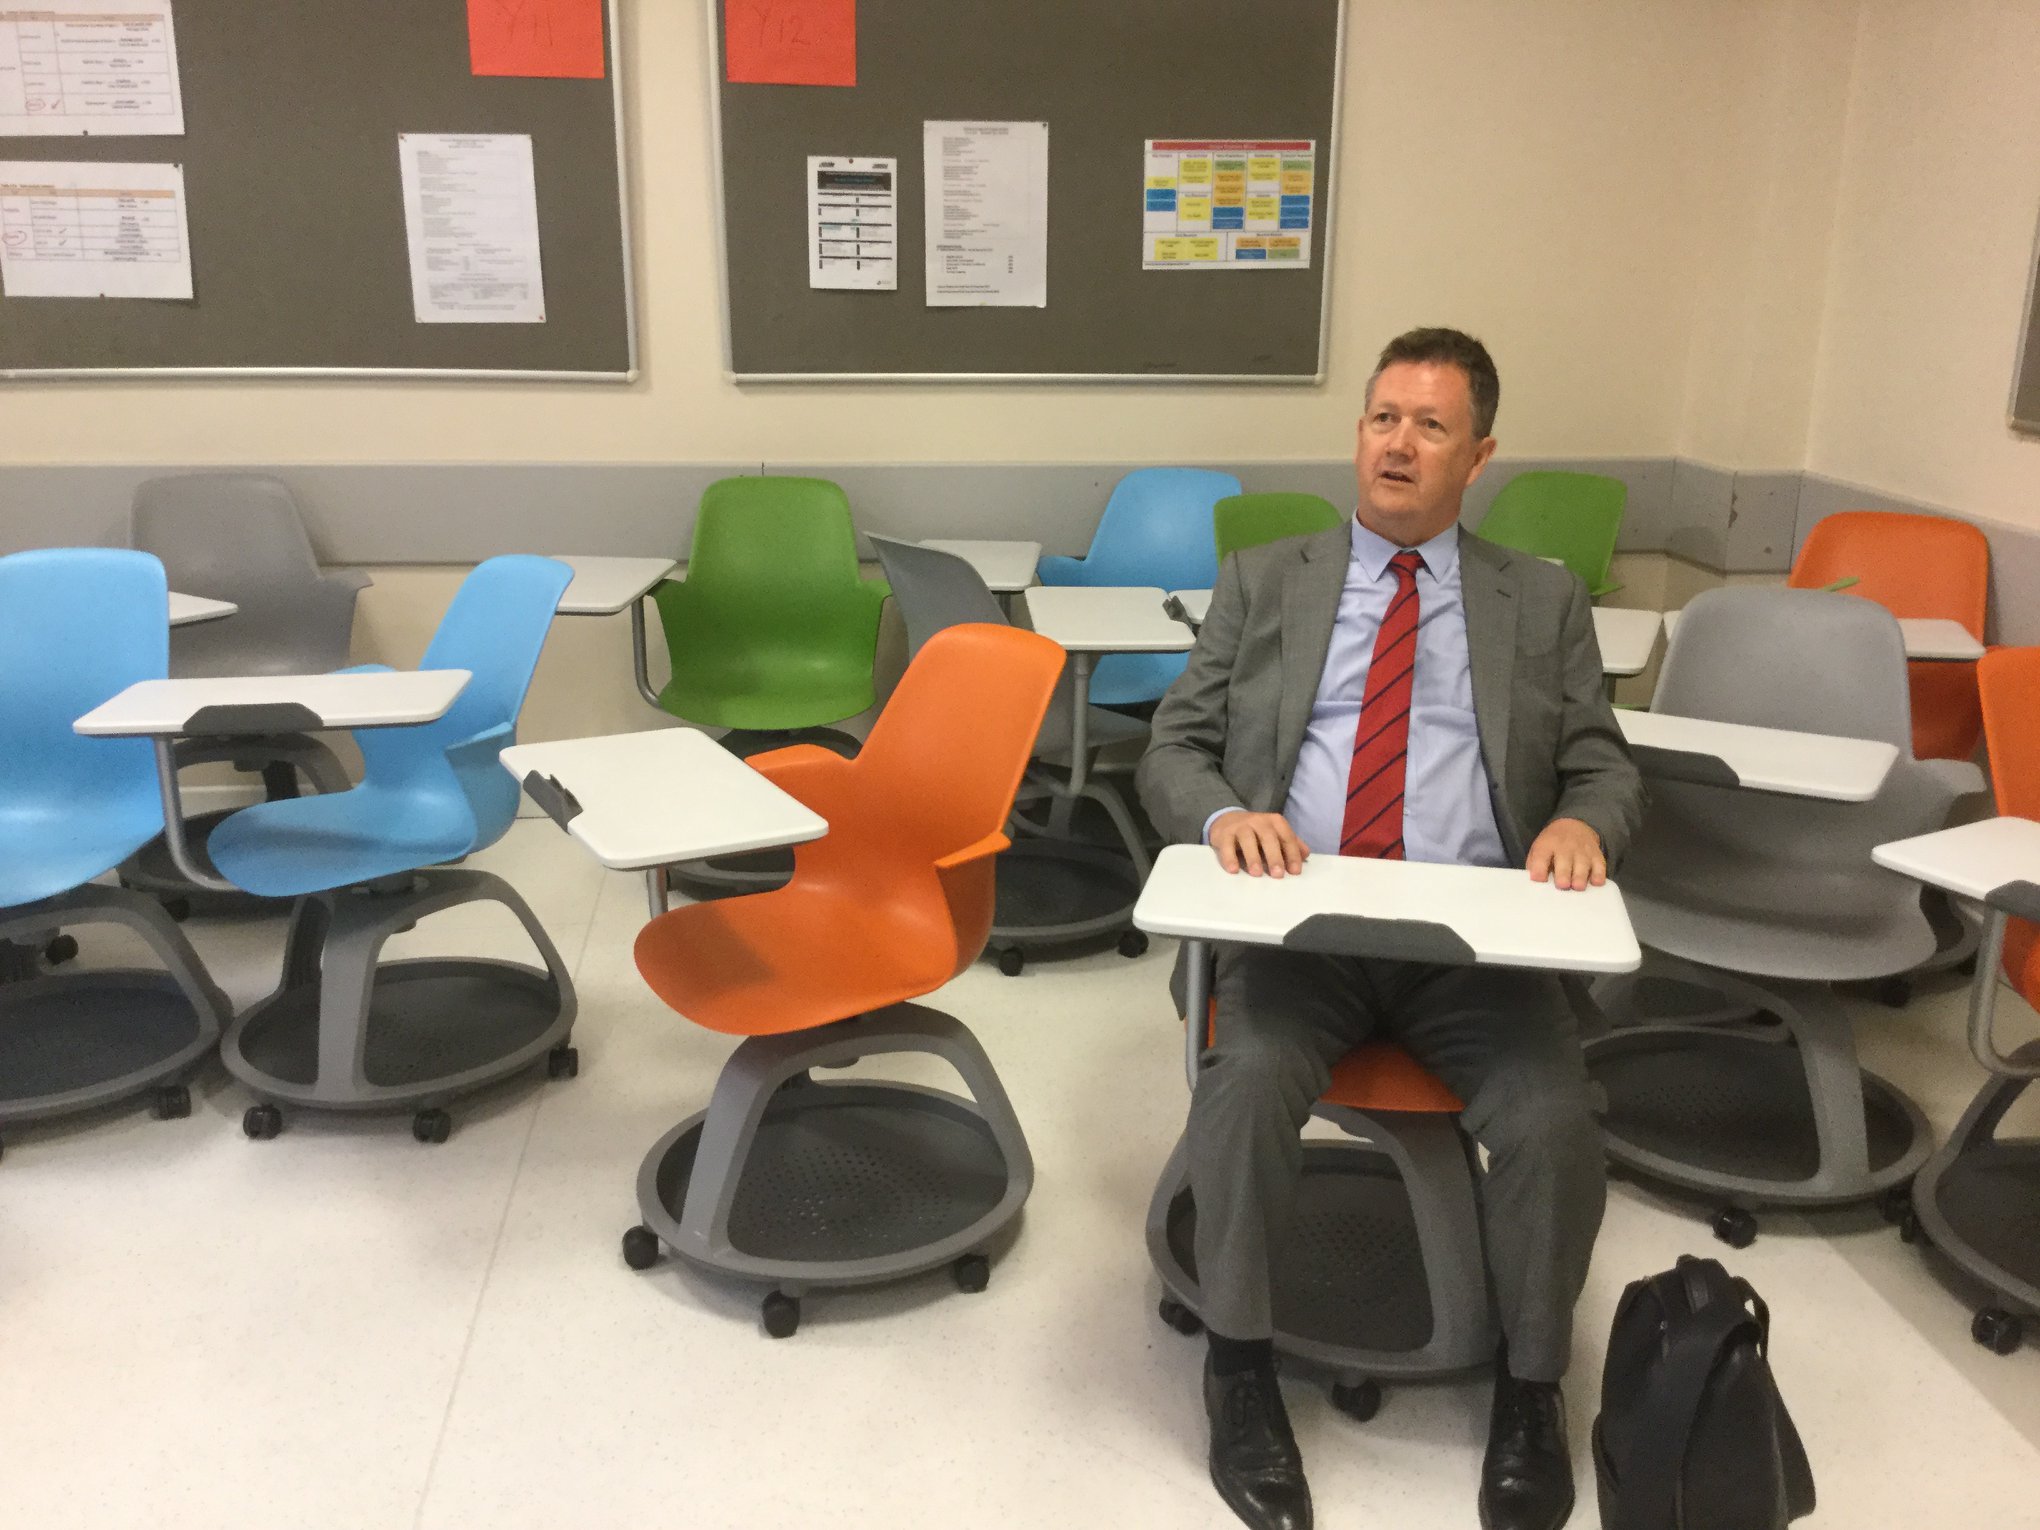 Bill tries out a colorful student desk at The KOC School, Istanbul